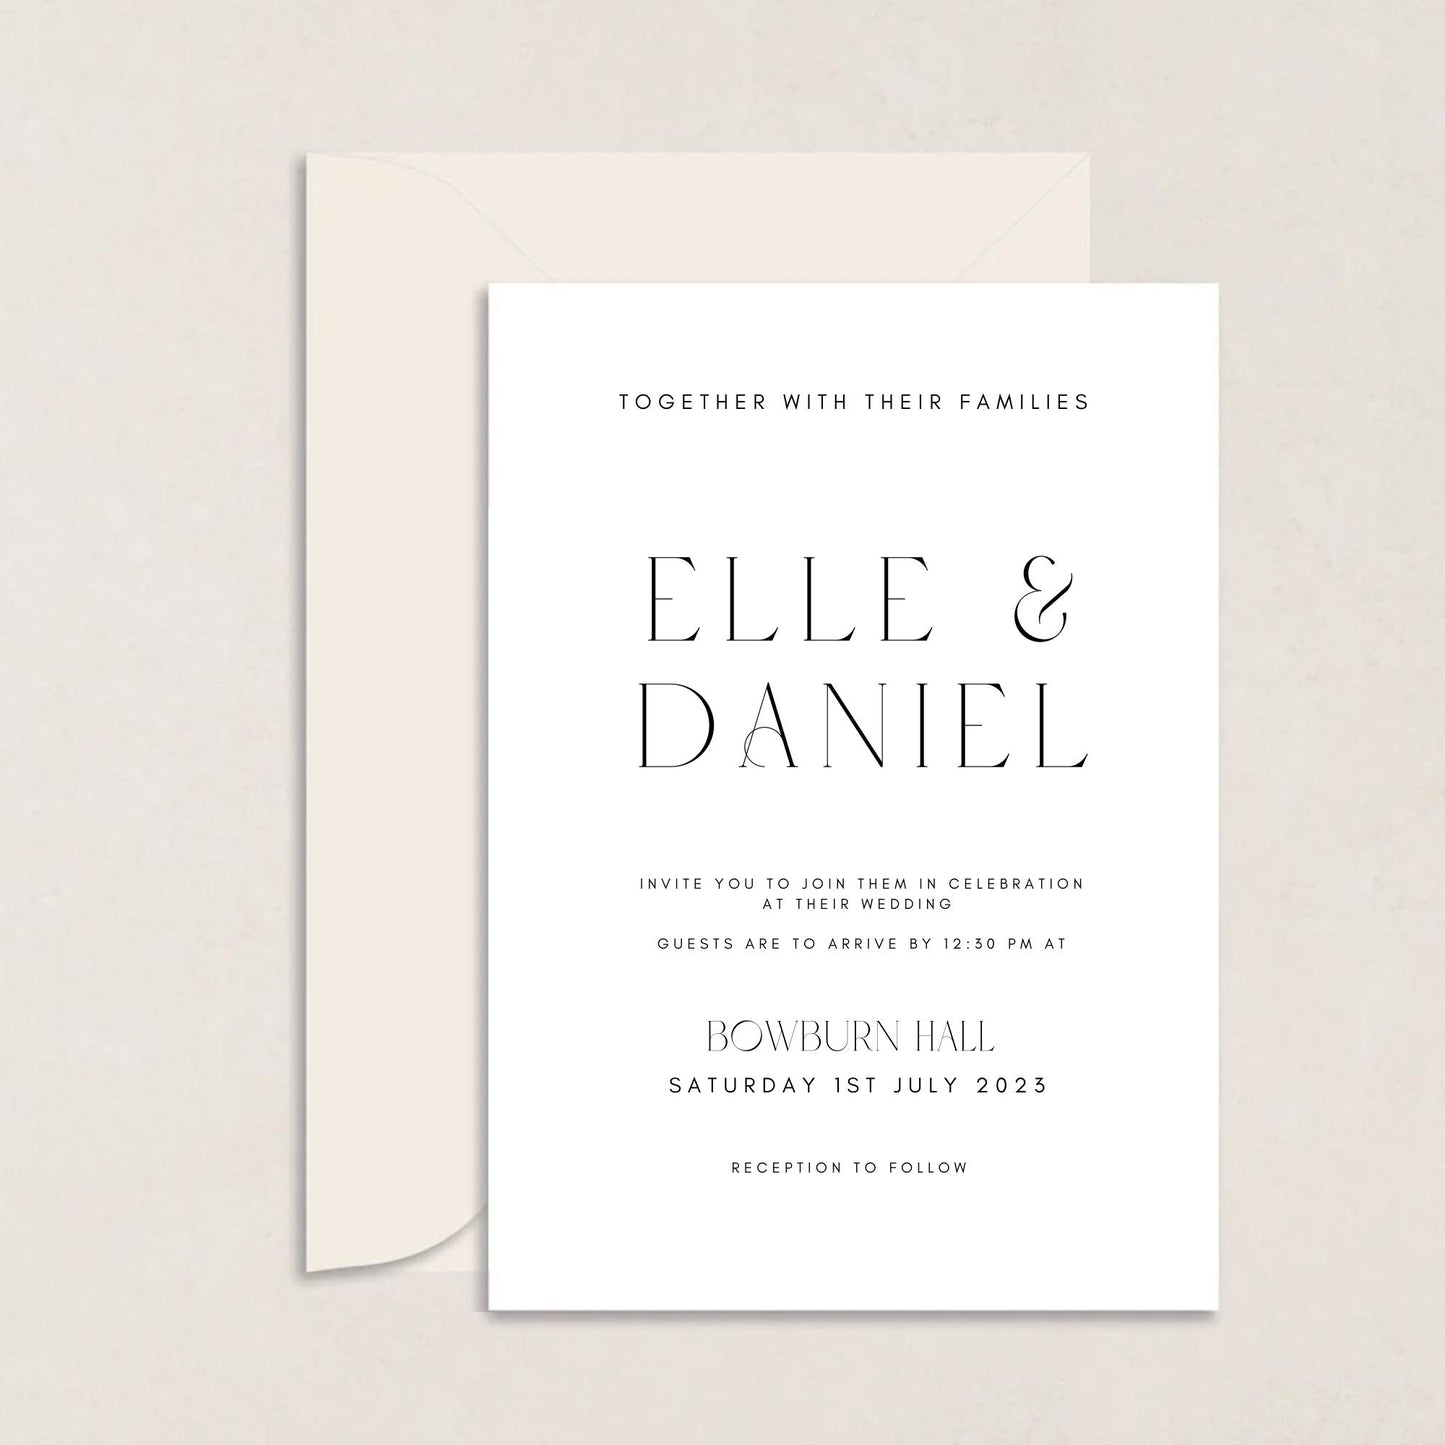 ELLE Wedding Invitations - Wedding Invitations available at The Ivy Collection | Luxury Wedding Stationery